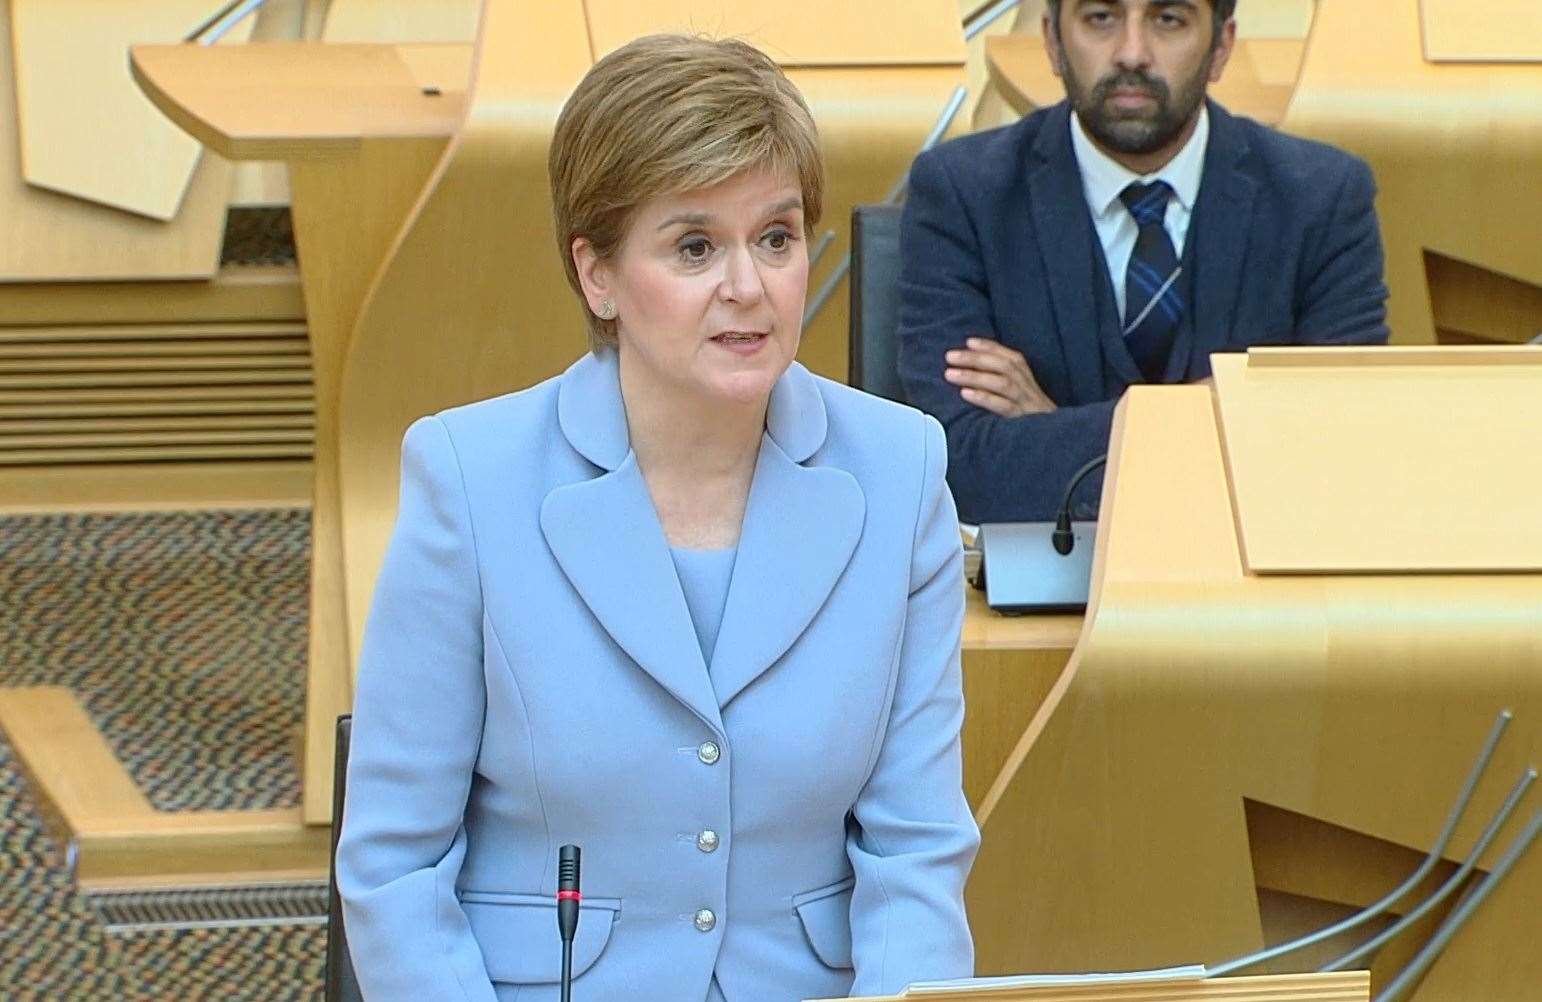 Nicola Sturgeon made the announcement at a virtual session of the Scottish Parliament on Tuesday.